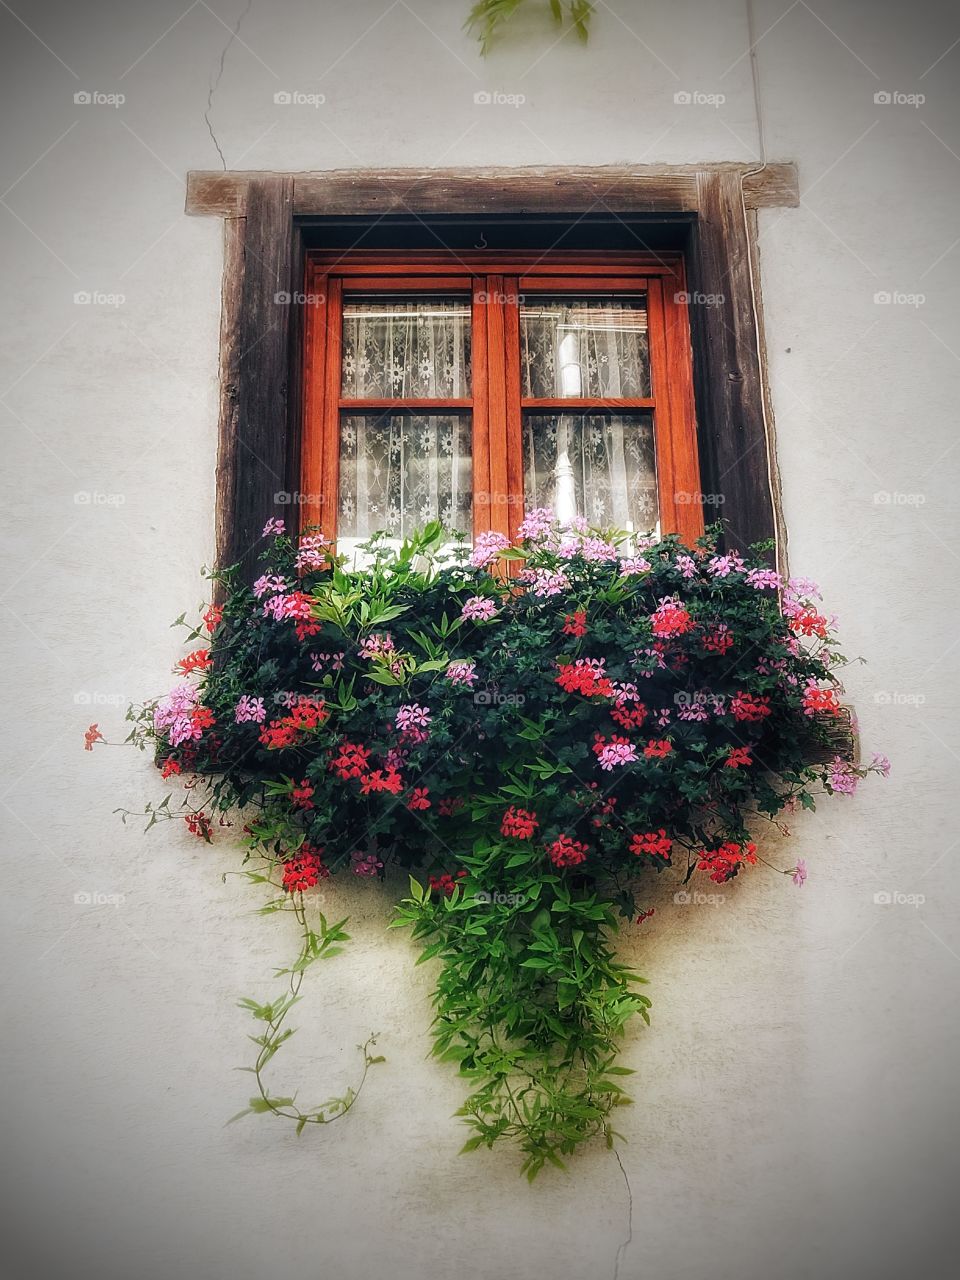 Alsace France Window and flowers